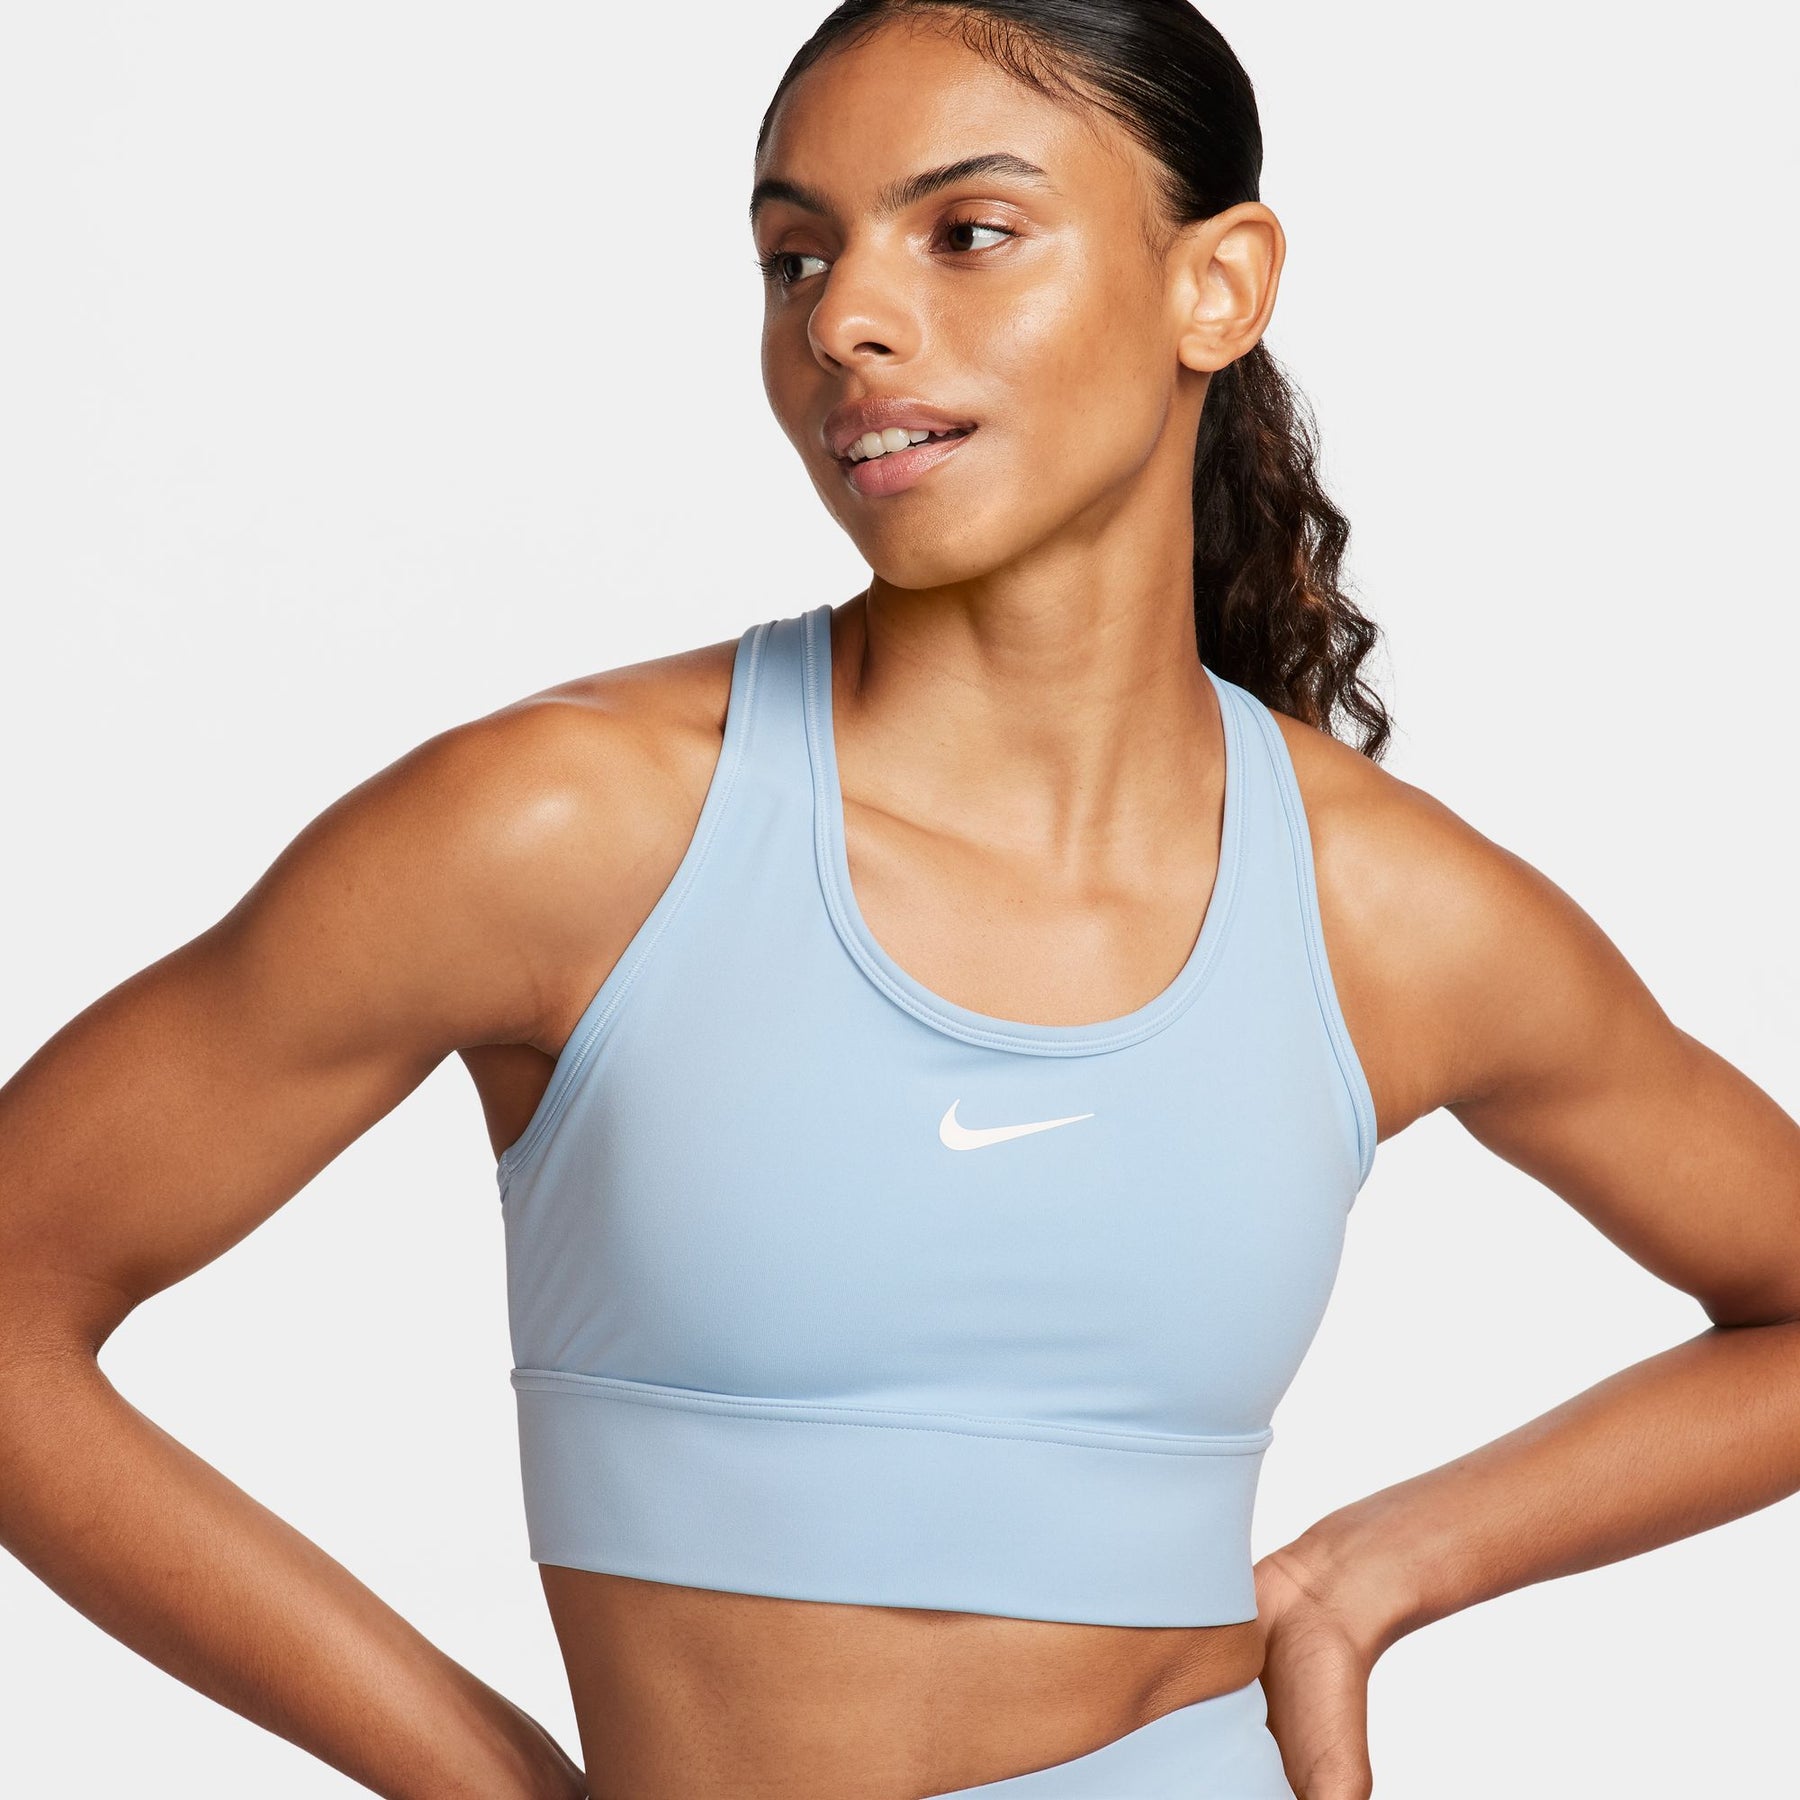 Brand New Nike Classic Sports Bra - Size S - Retails for $35.00